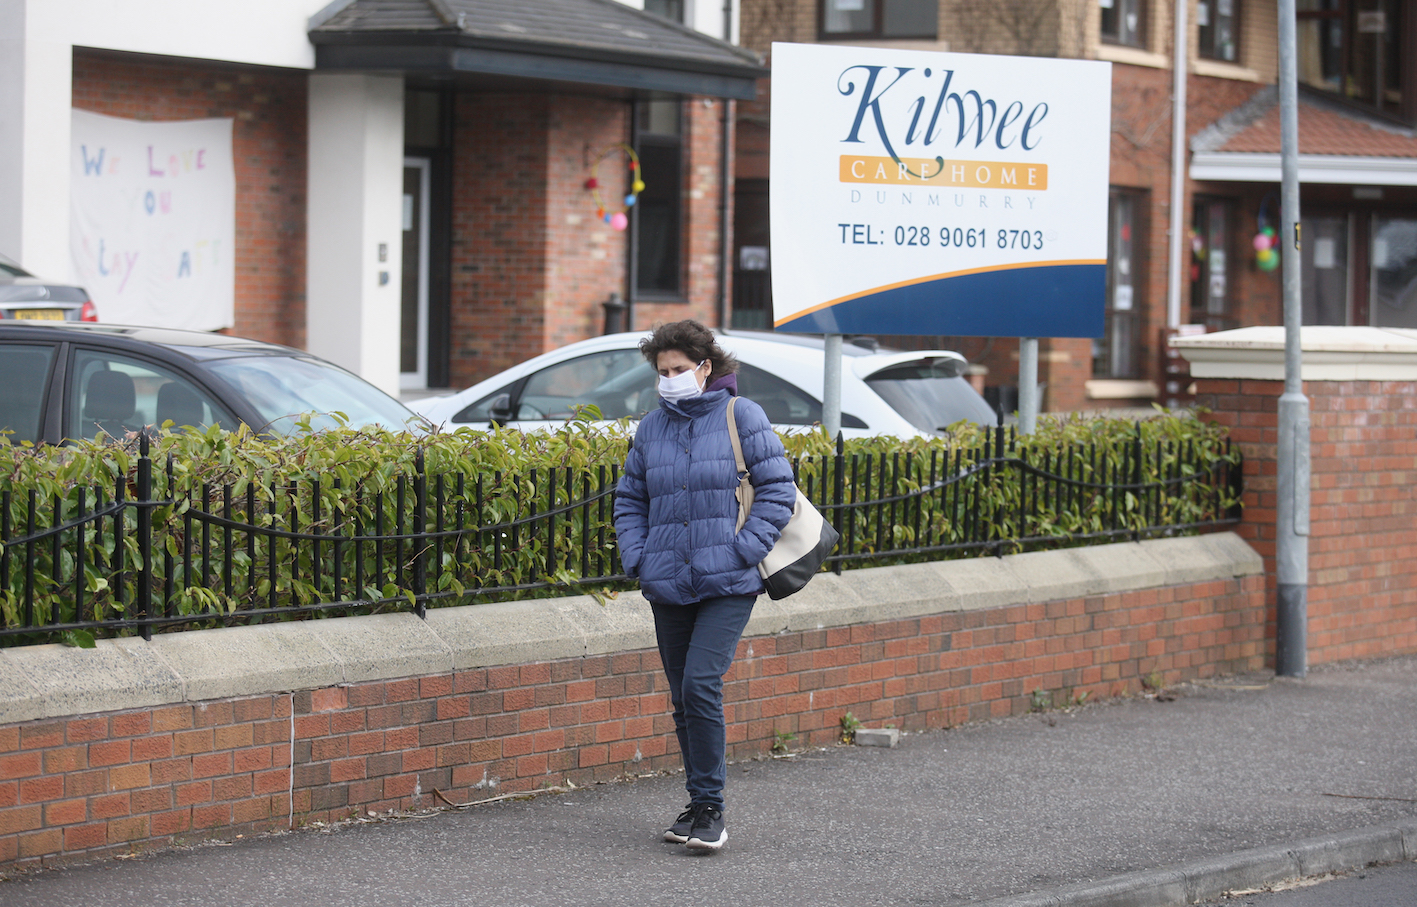 KILWEE: One death has occurred at Kilwee Care Home due to coronavirus 